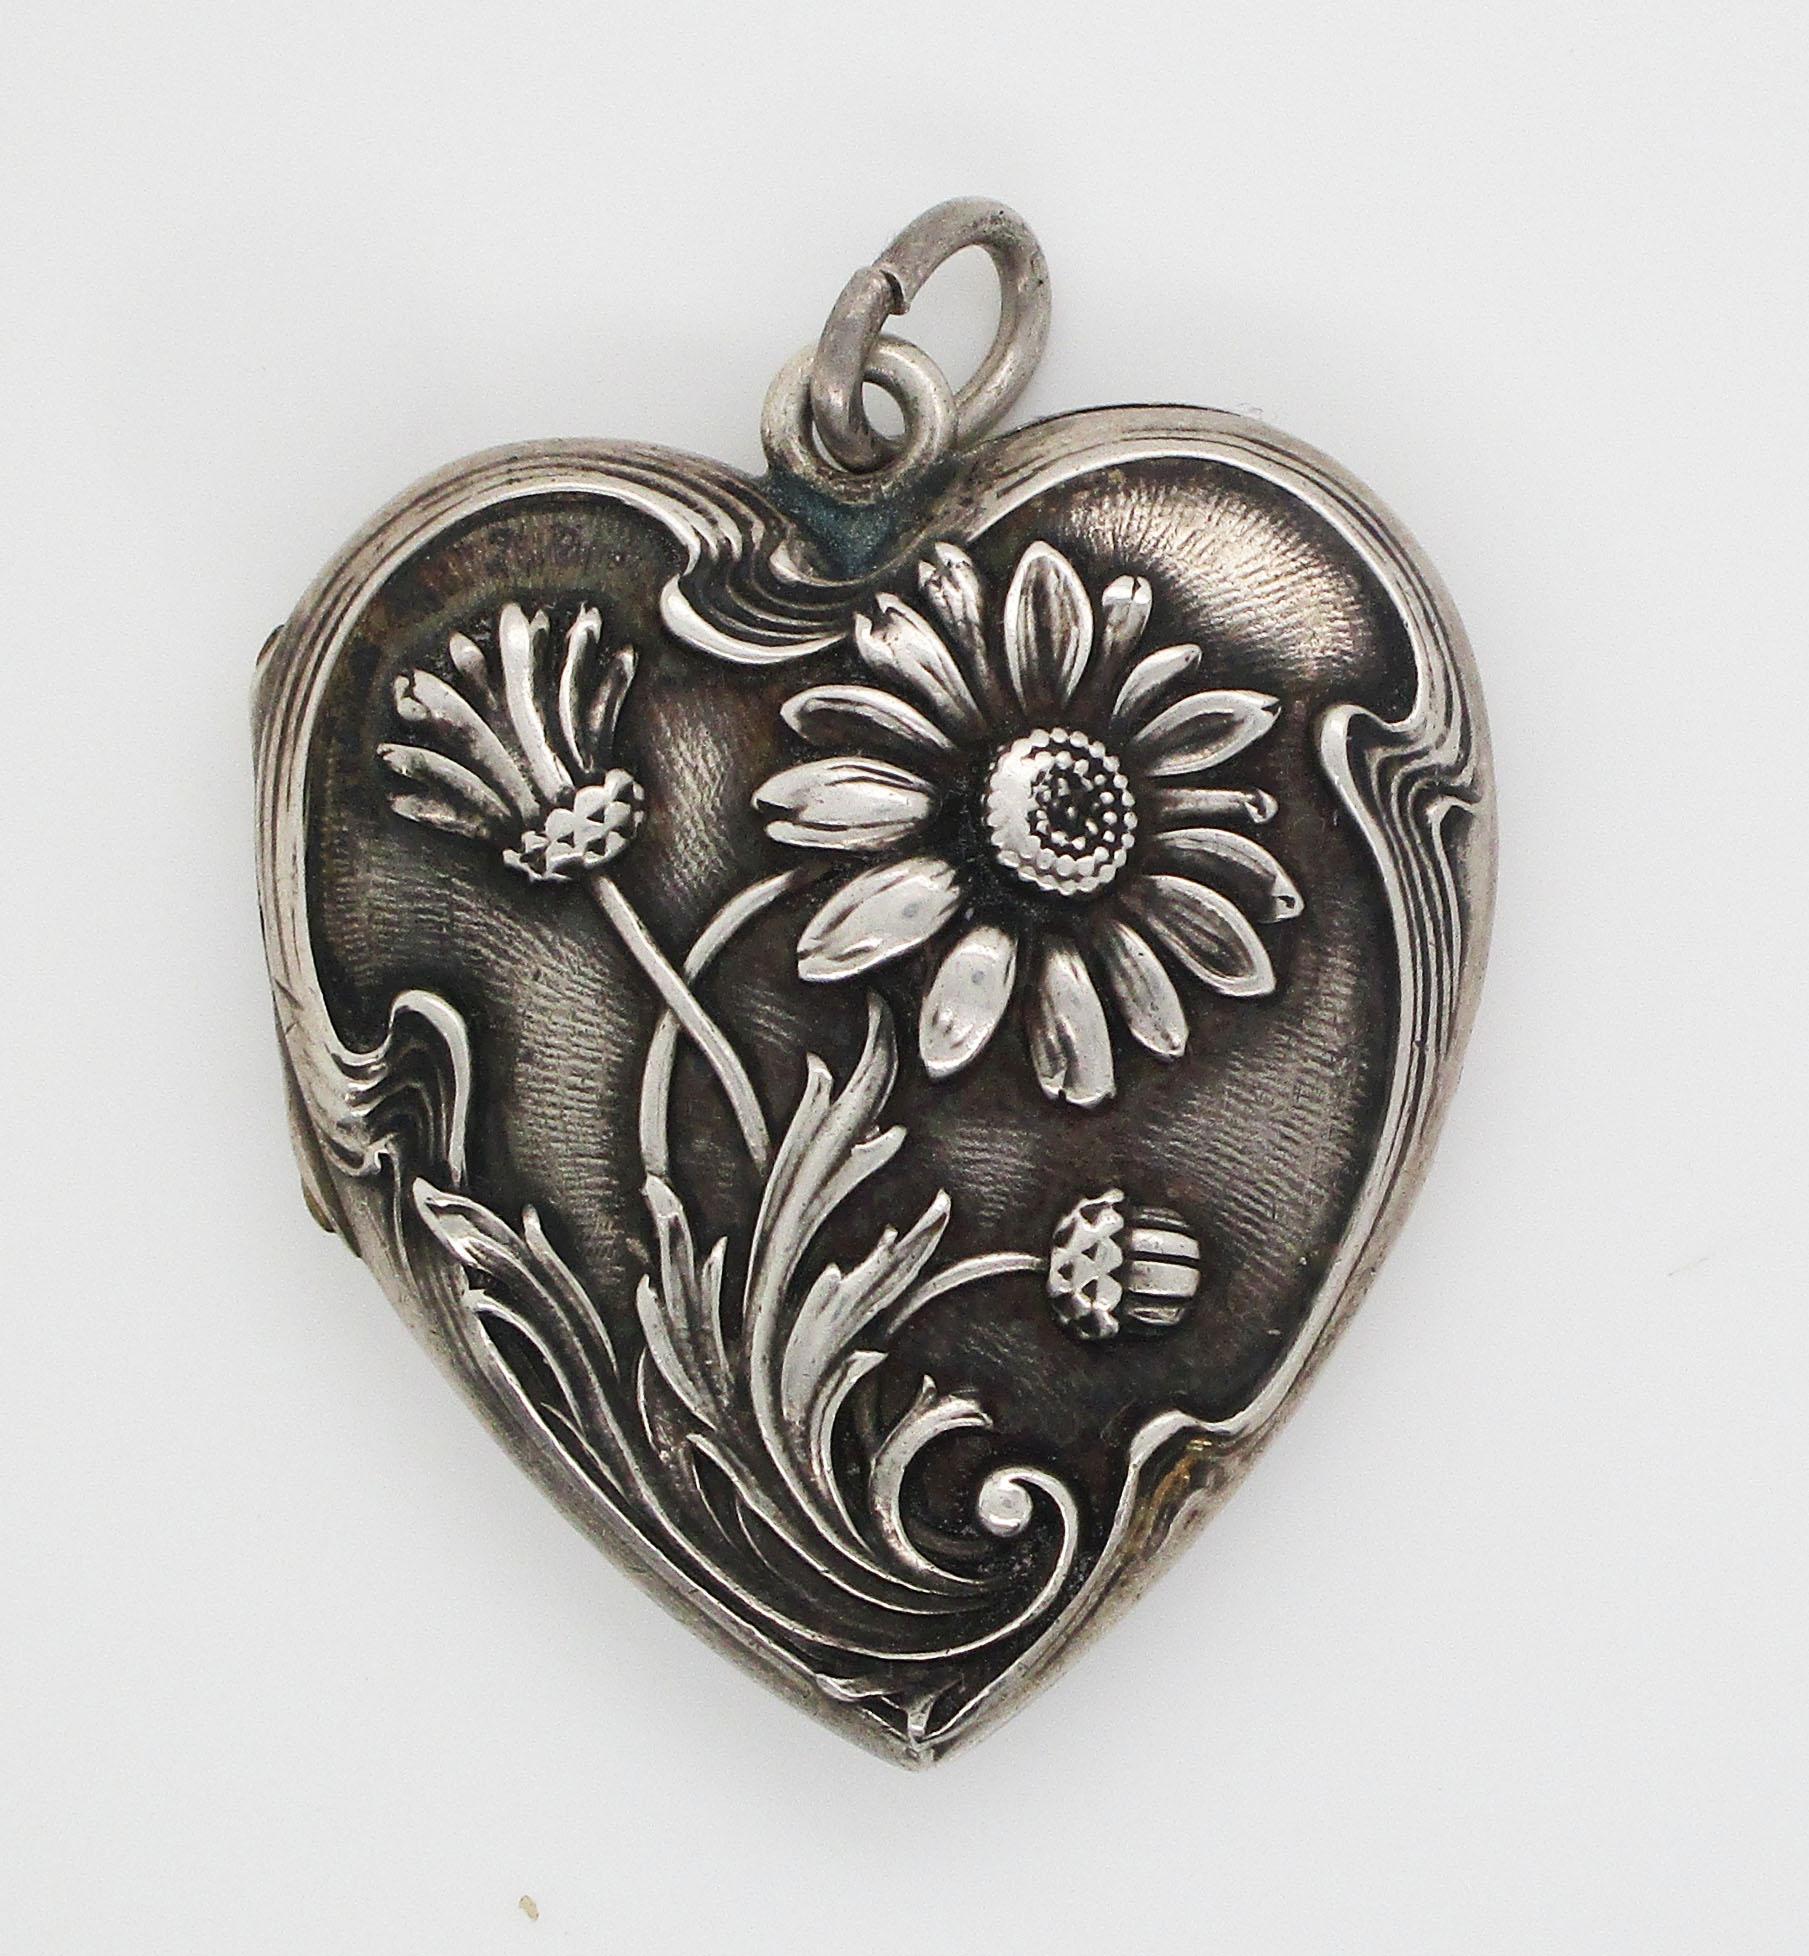 This beautiful Art Nouveau locket is in sterling silver and features a gorgeous flower design on a lovely heart shape! The front of the locket has a beautiful flower design with an excellent depth and a high contrast. The lines and design of the